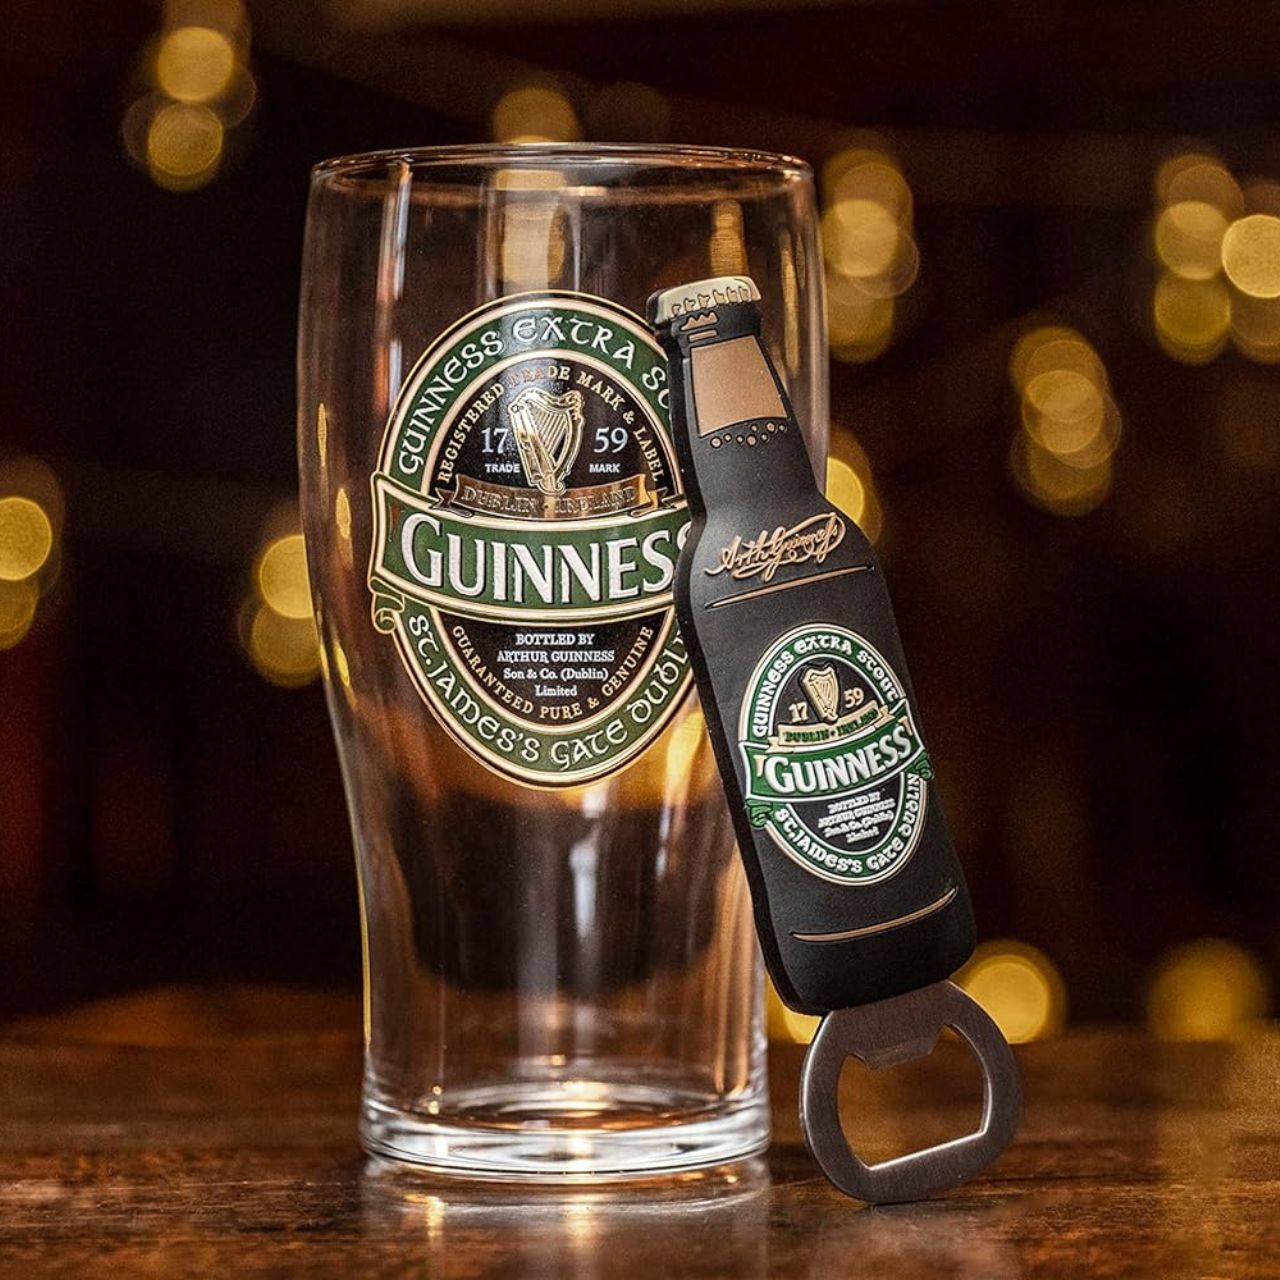 If you're looking for a housewarming gift for someone who loves Guinness, then this Guinness Pint Glass Set is the perfect choice!